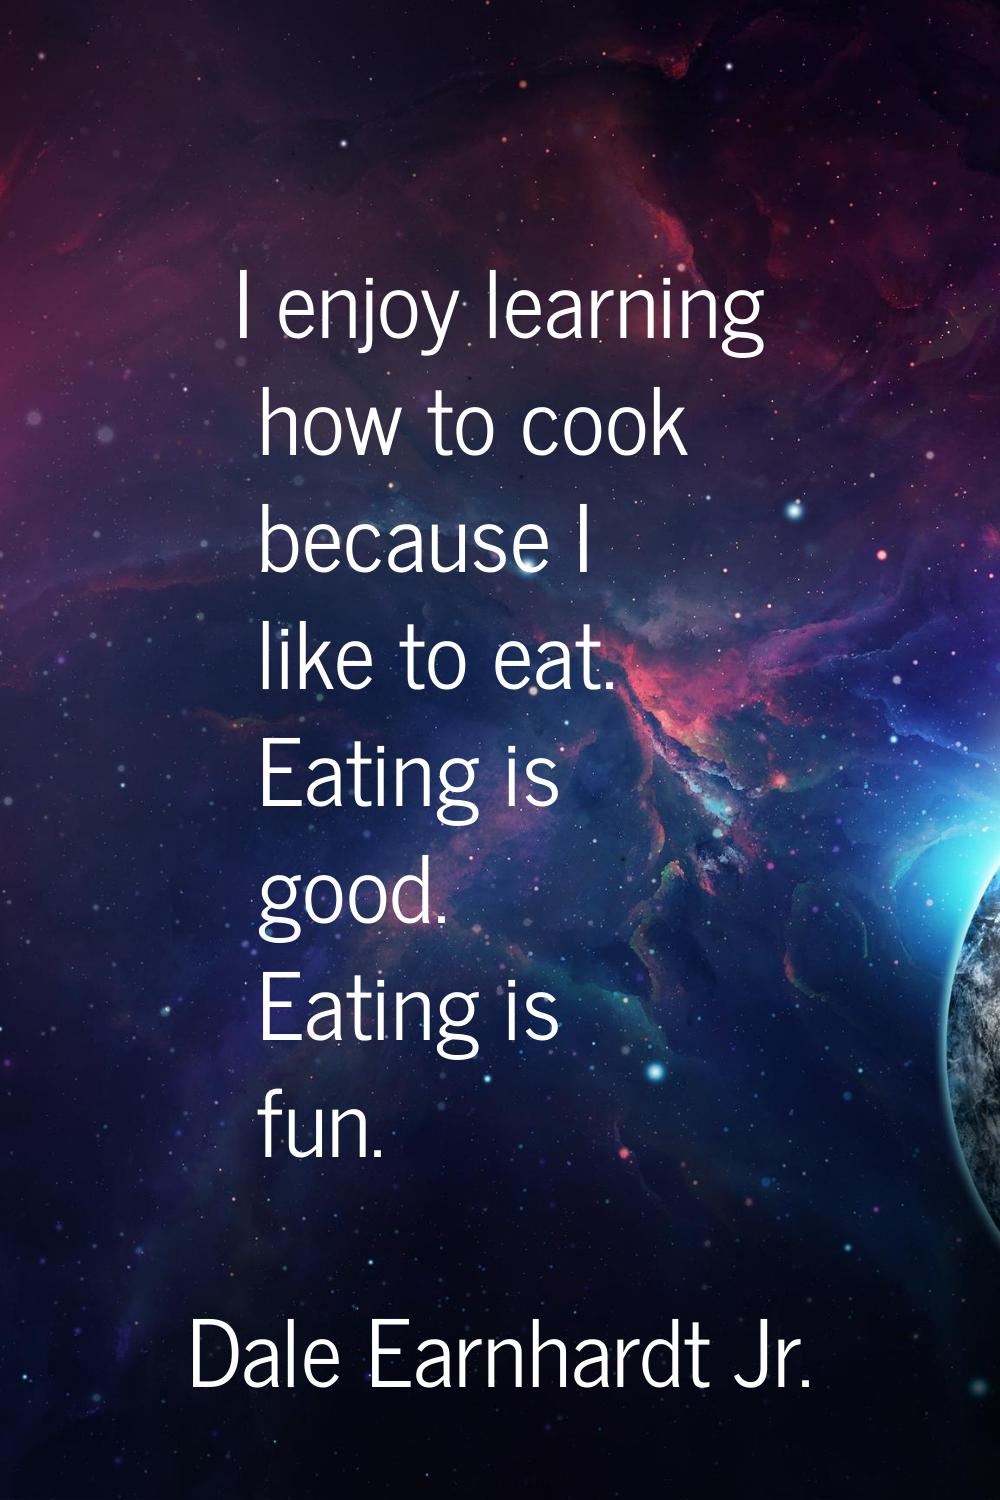 I enjoy learning how to cook because I like to eat. Eating is good. Eating is fun.